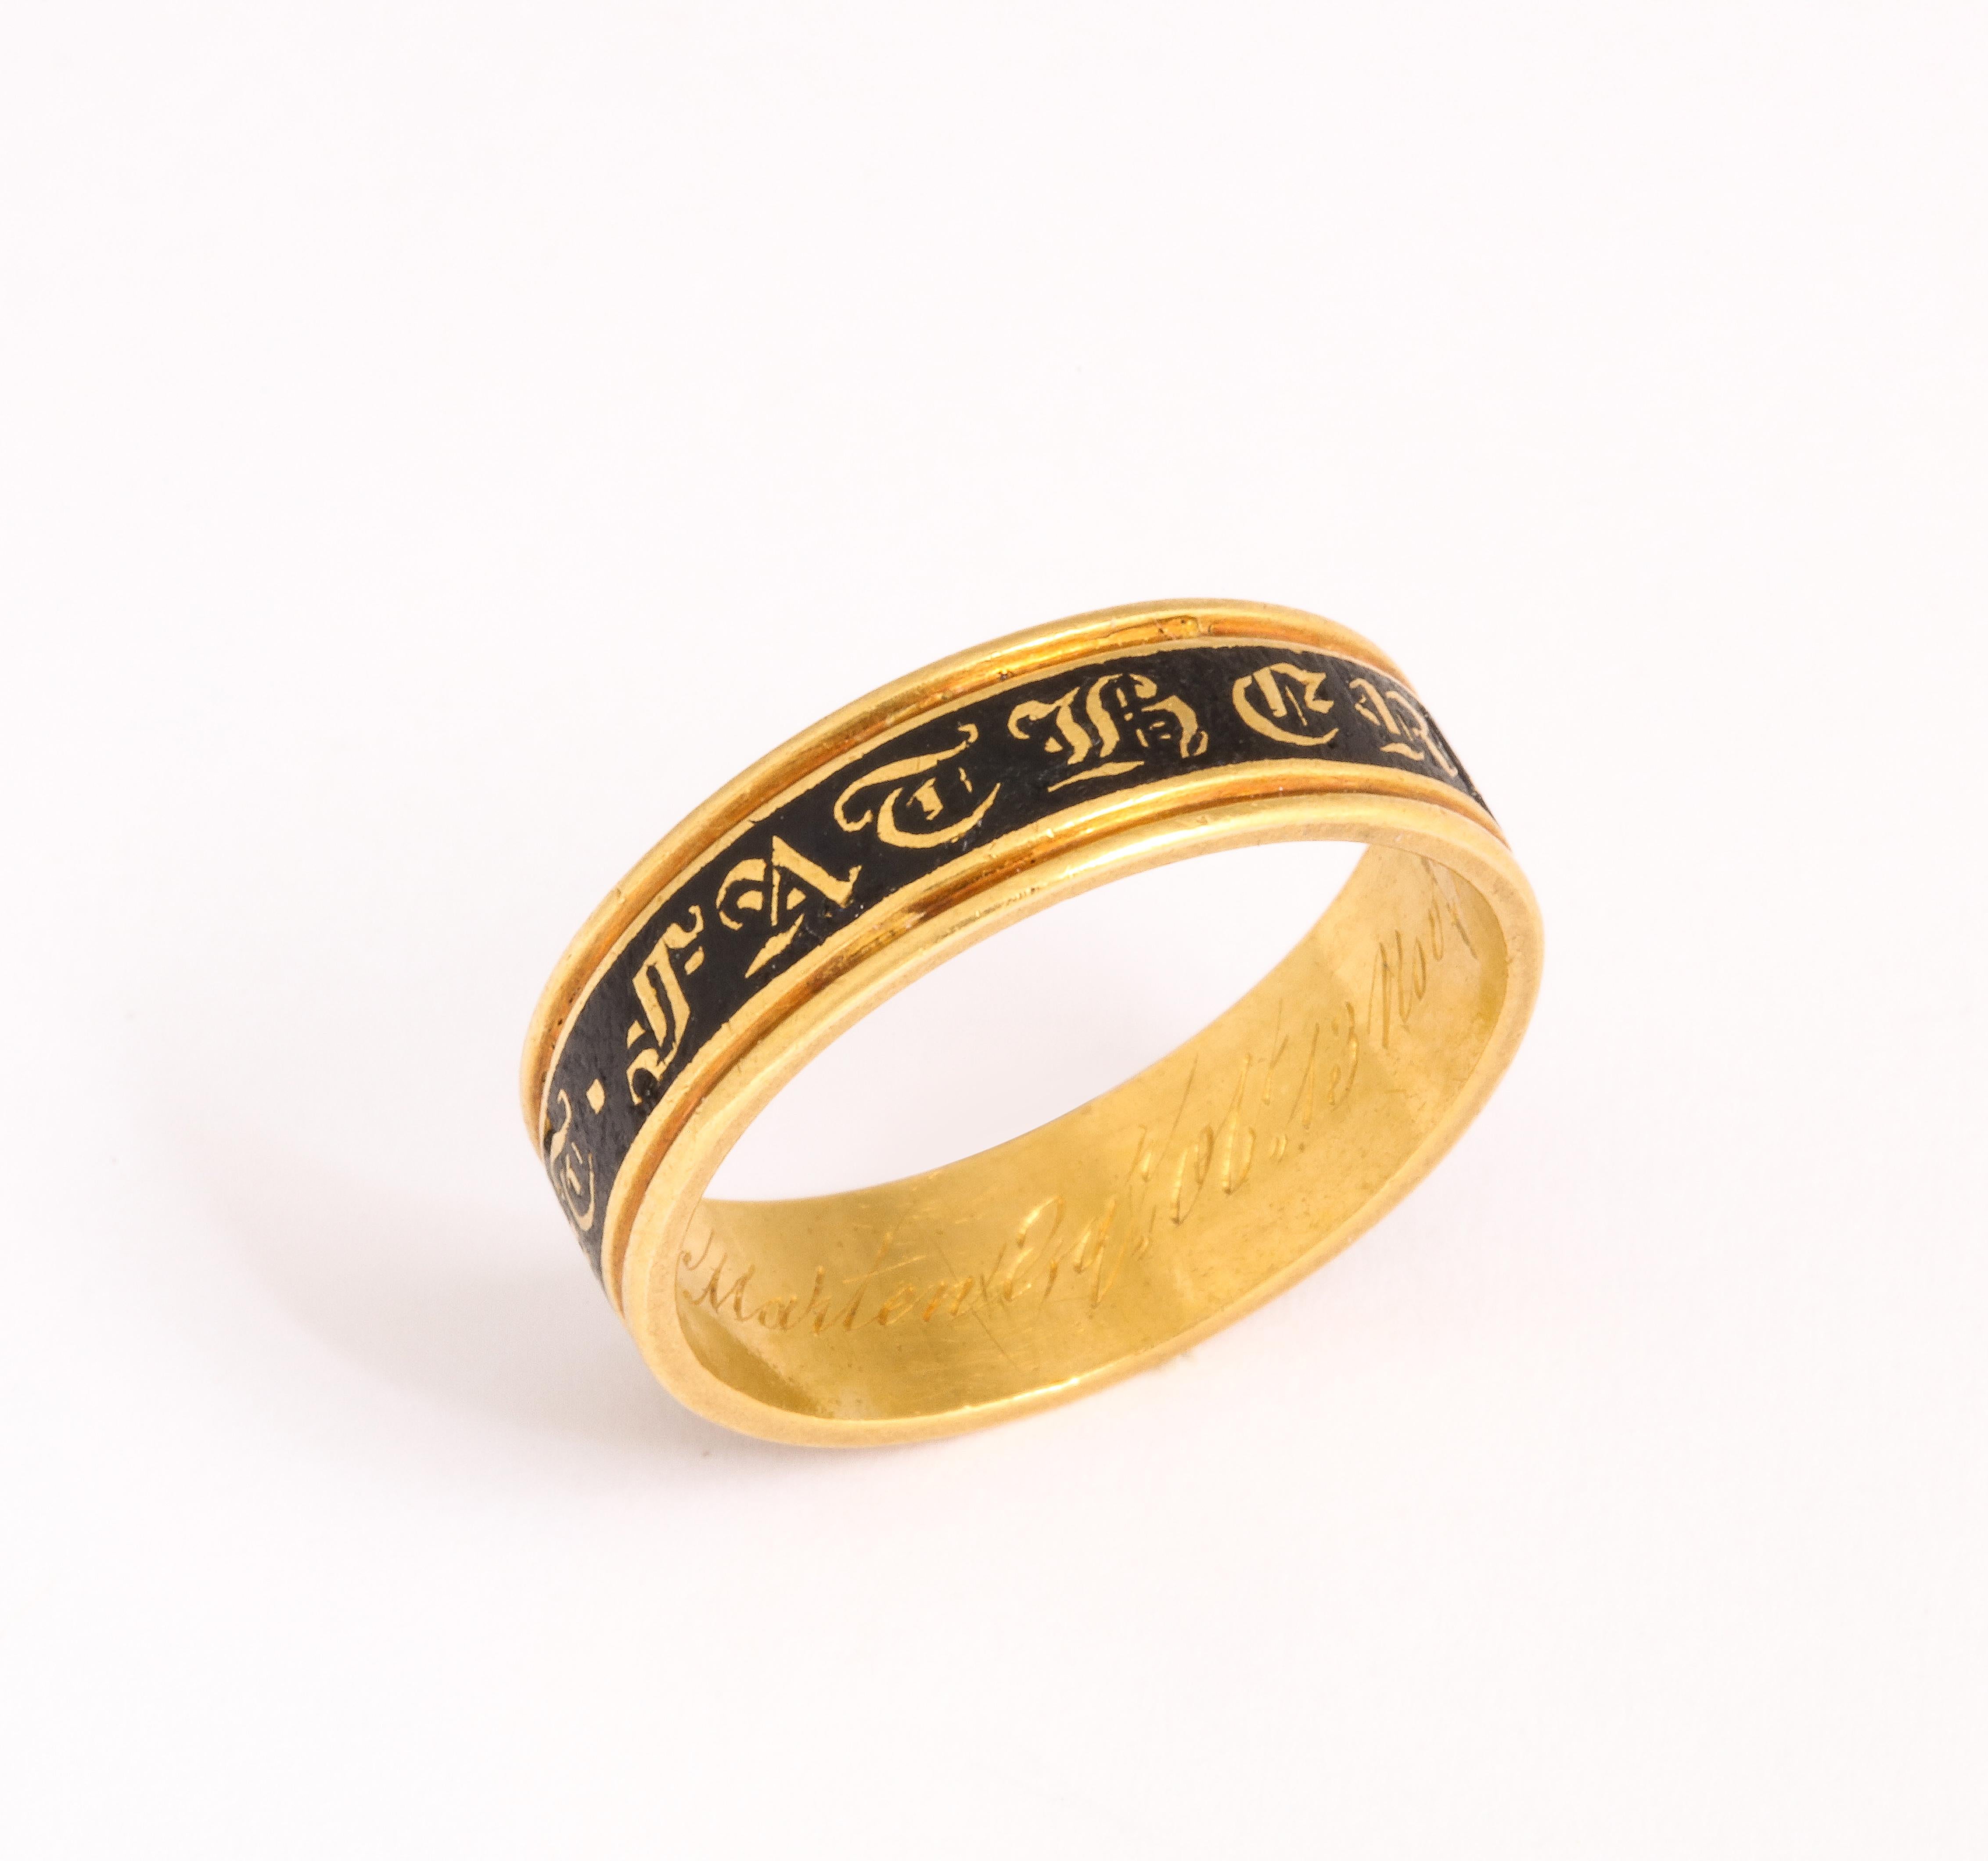 An endearing 18 kt gold and enamel memorial band celebrating the life of  a dear father, dated 1842 honors William Marten Esquire who passed away at the ripe age of 81 years. My goodness William was born in 1741!! In this year Handel composed the